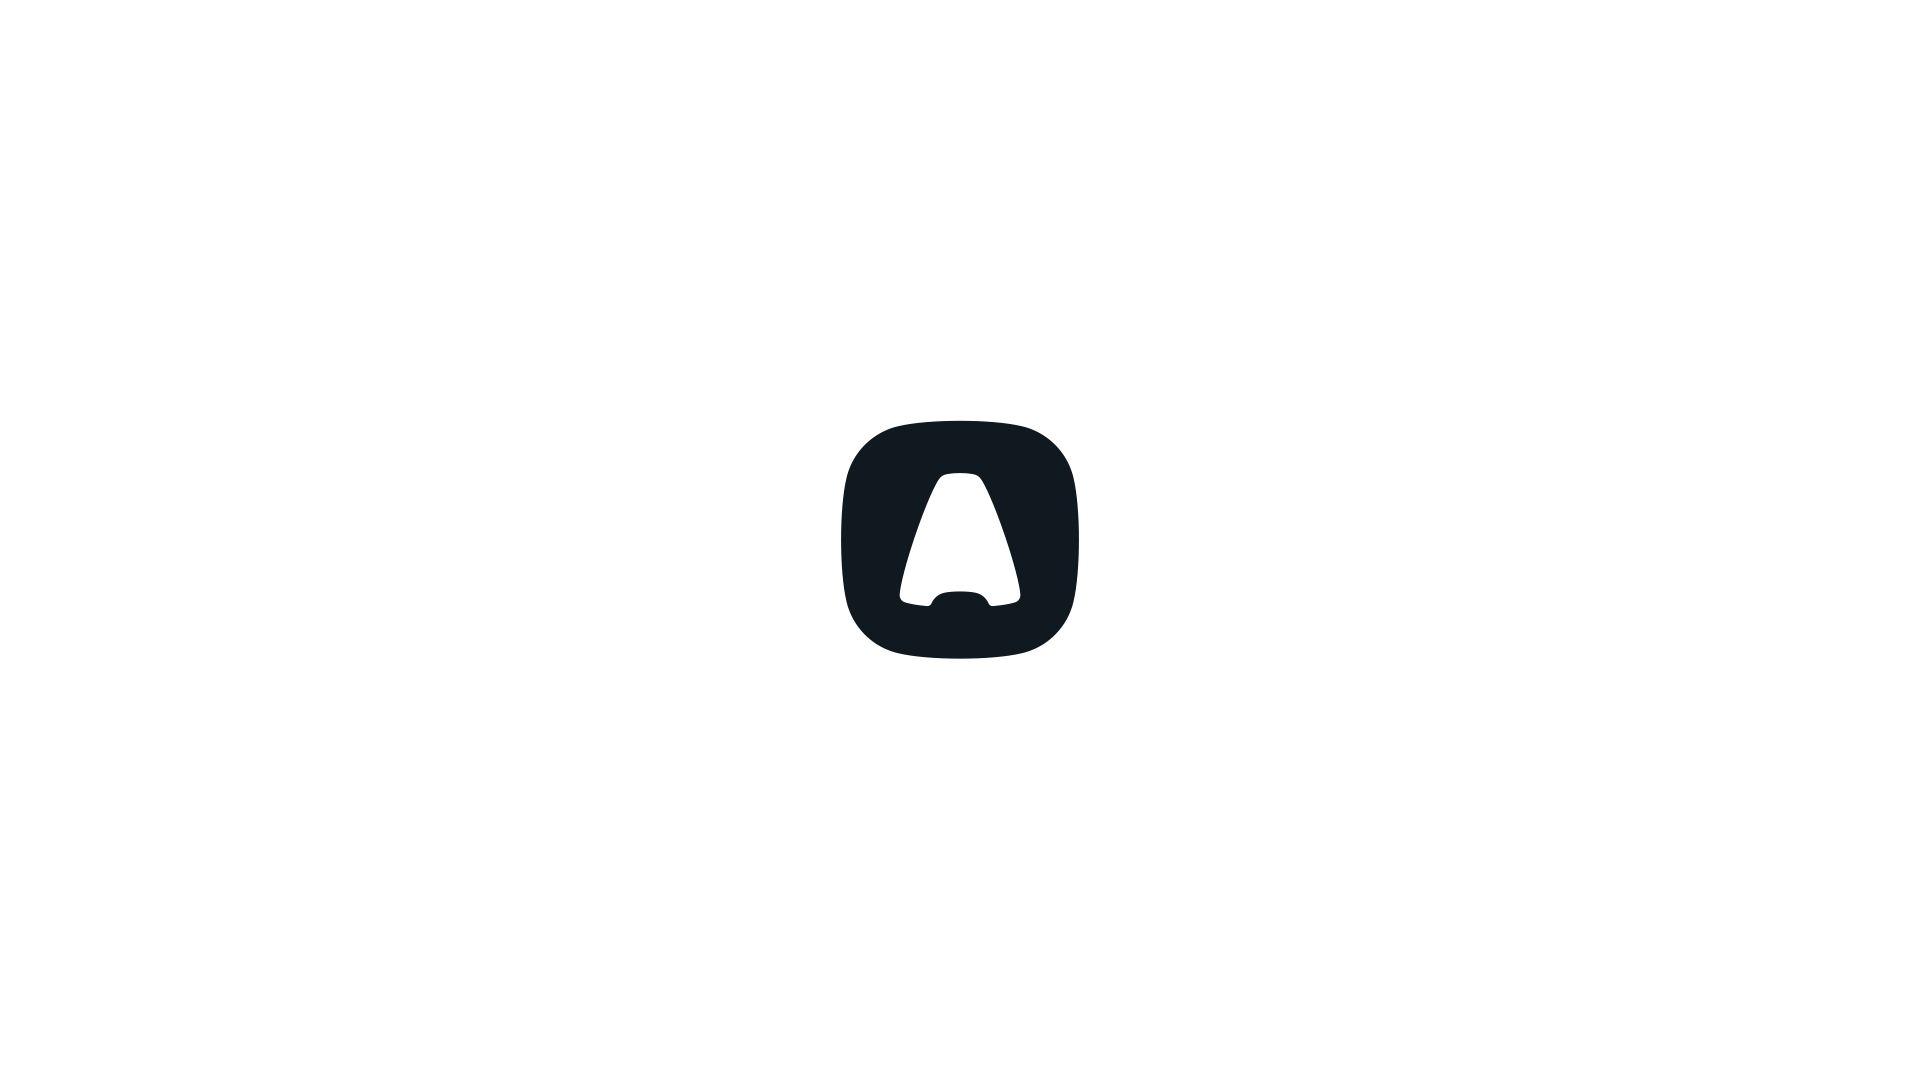 New Logo and Identity for Aircall by Muxu.Muxu and In-house